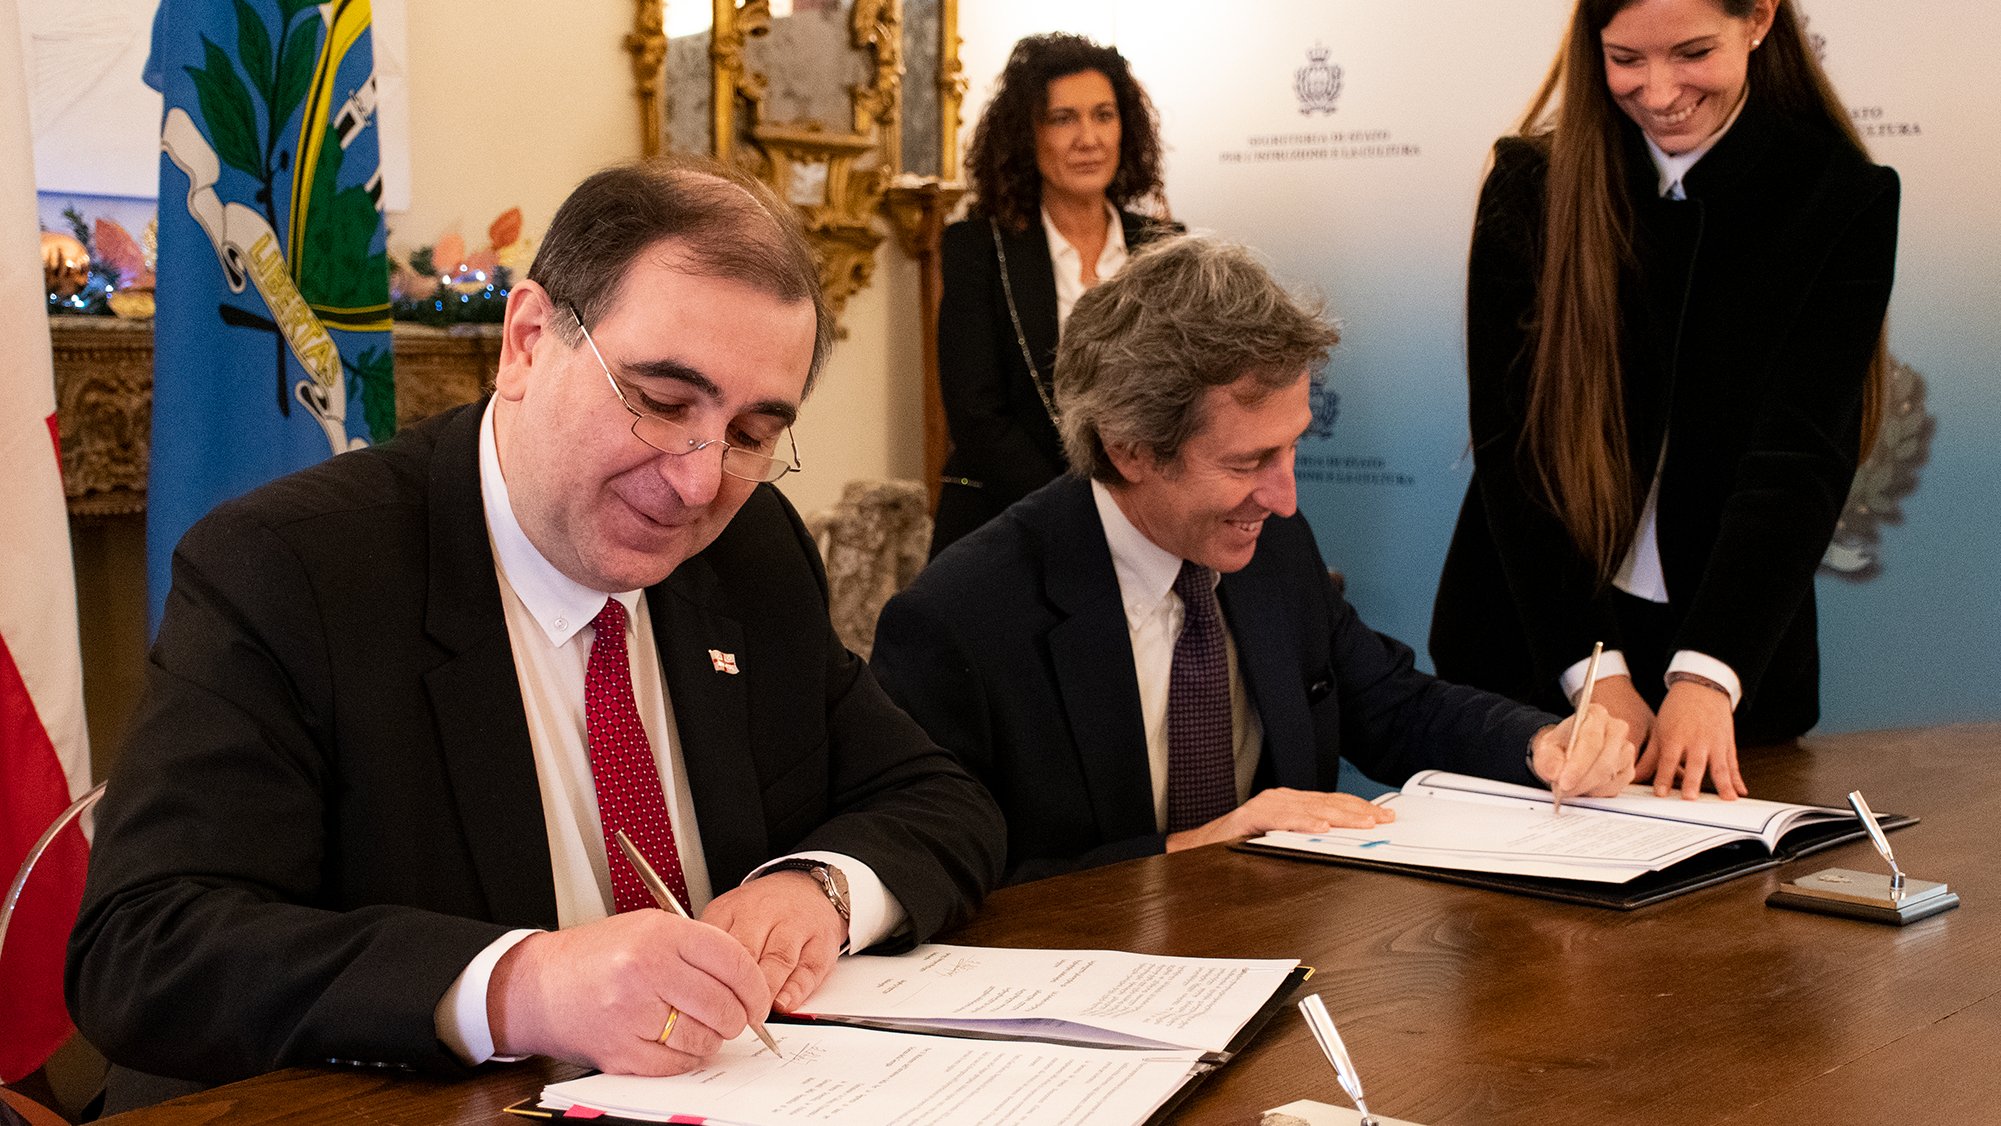 Education and science are the factors of economic development and means to strengthen, enhance and further develop cooperation between the Republic of San Marino and Georgia.